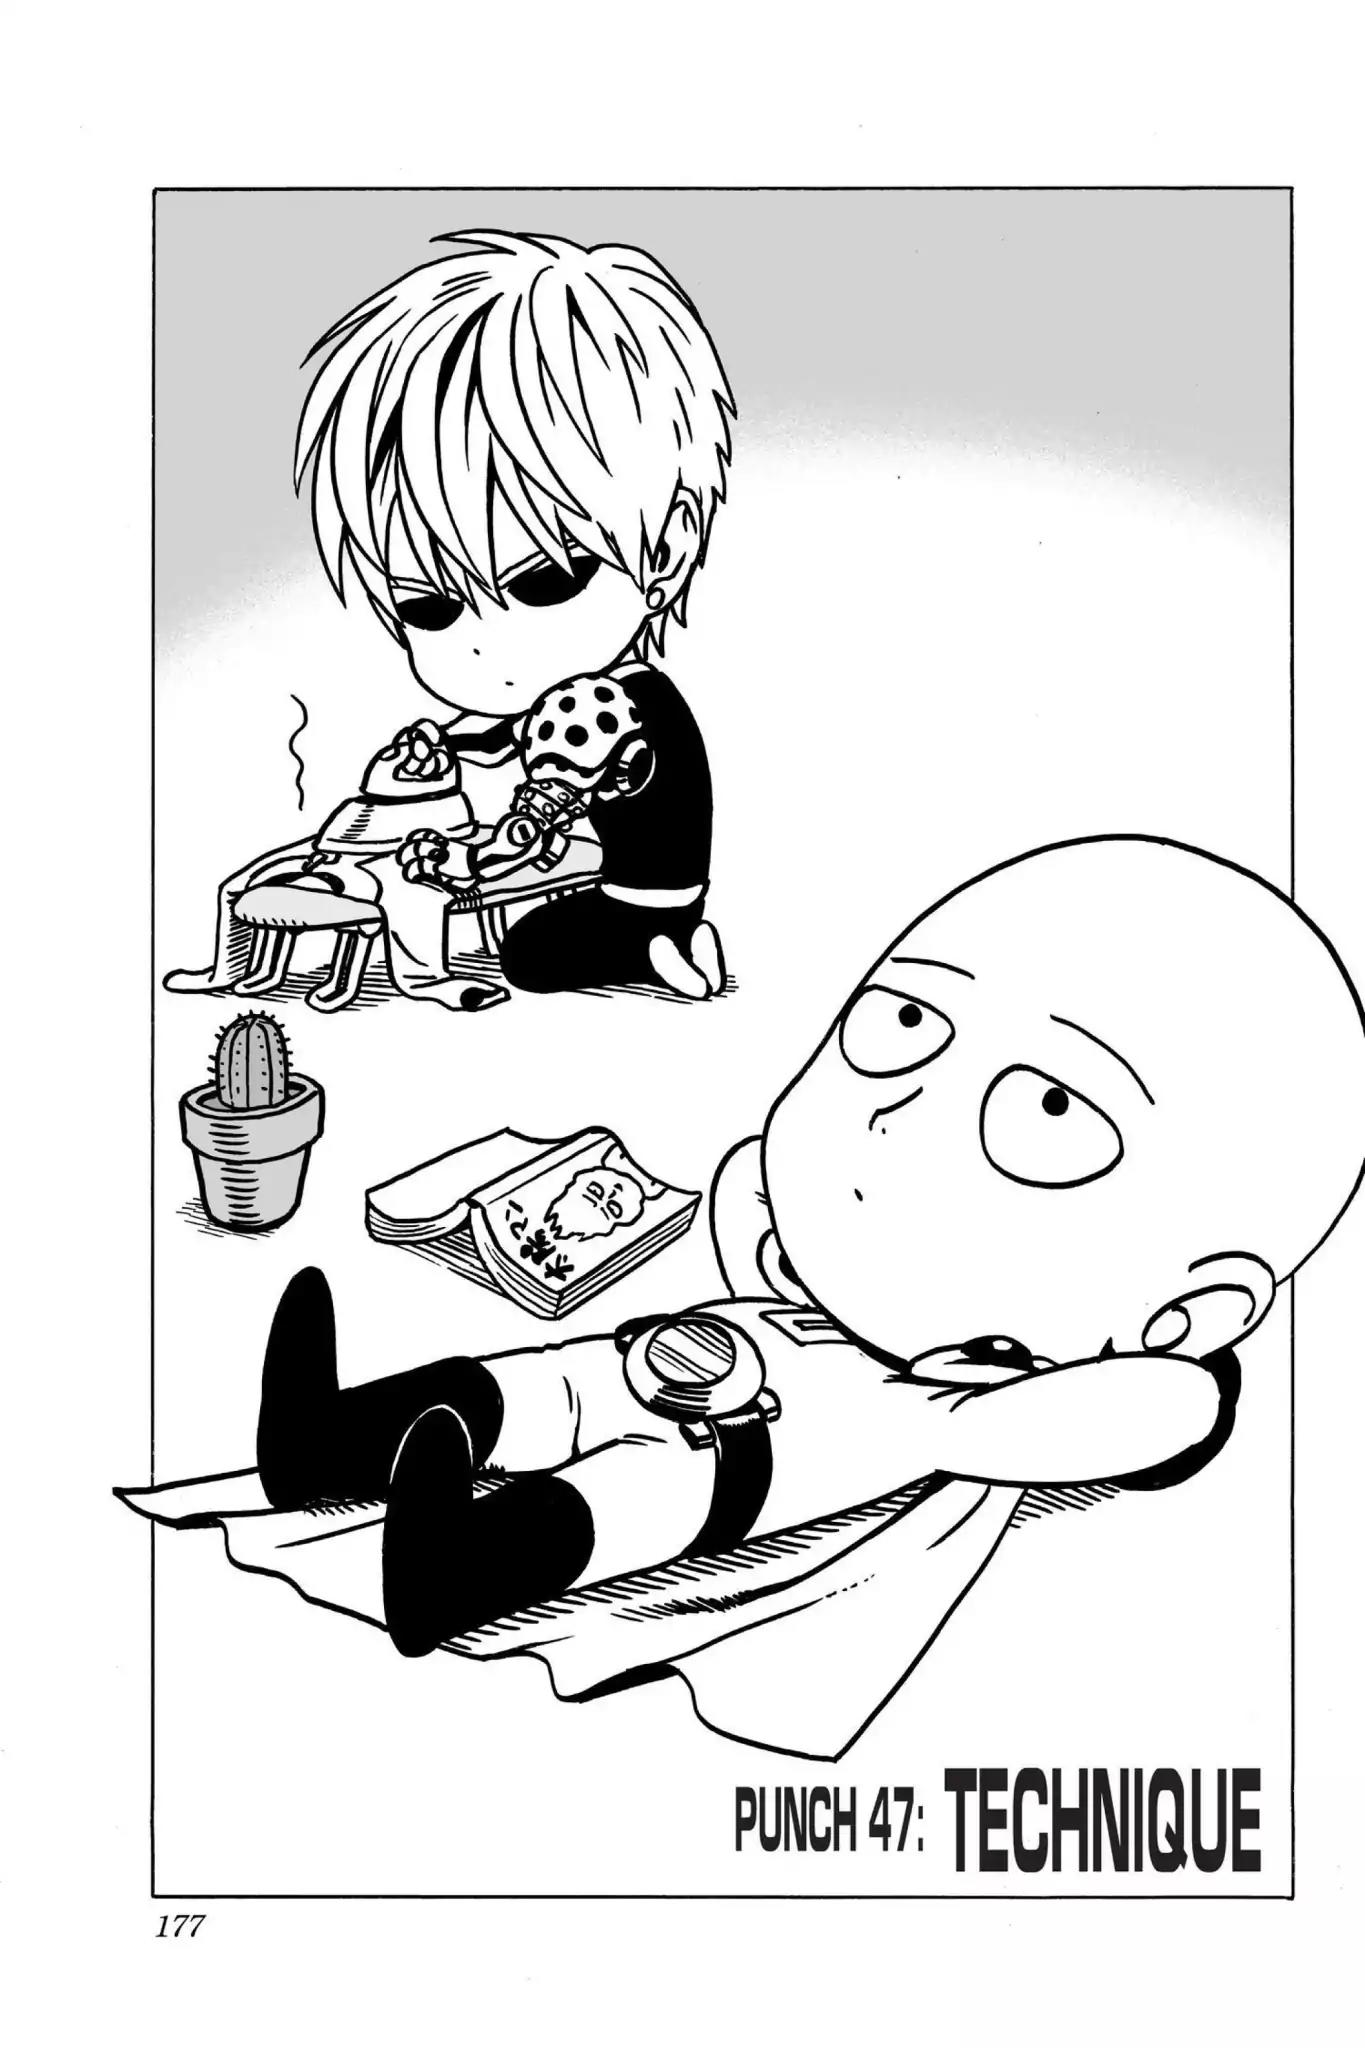 One Punch Man, Chapter 47 Technique image 01